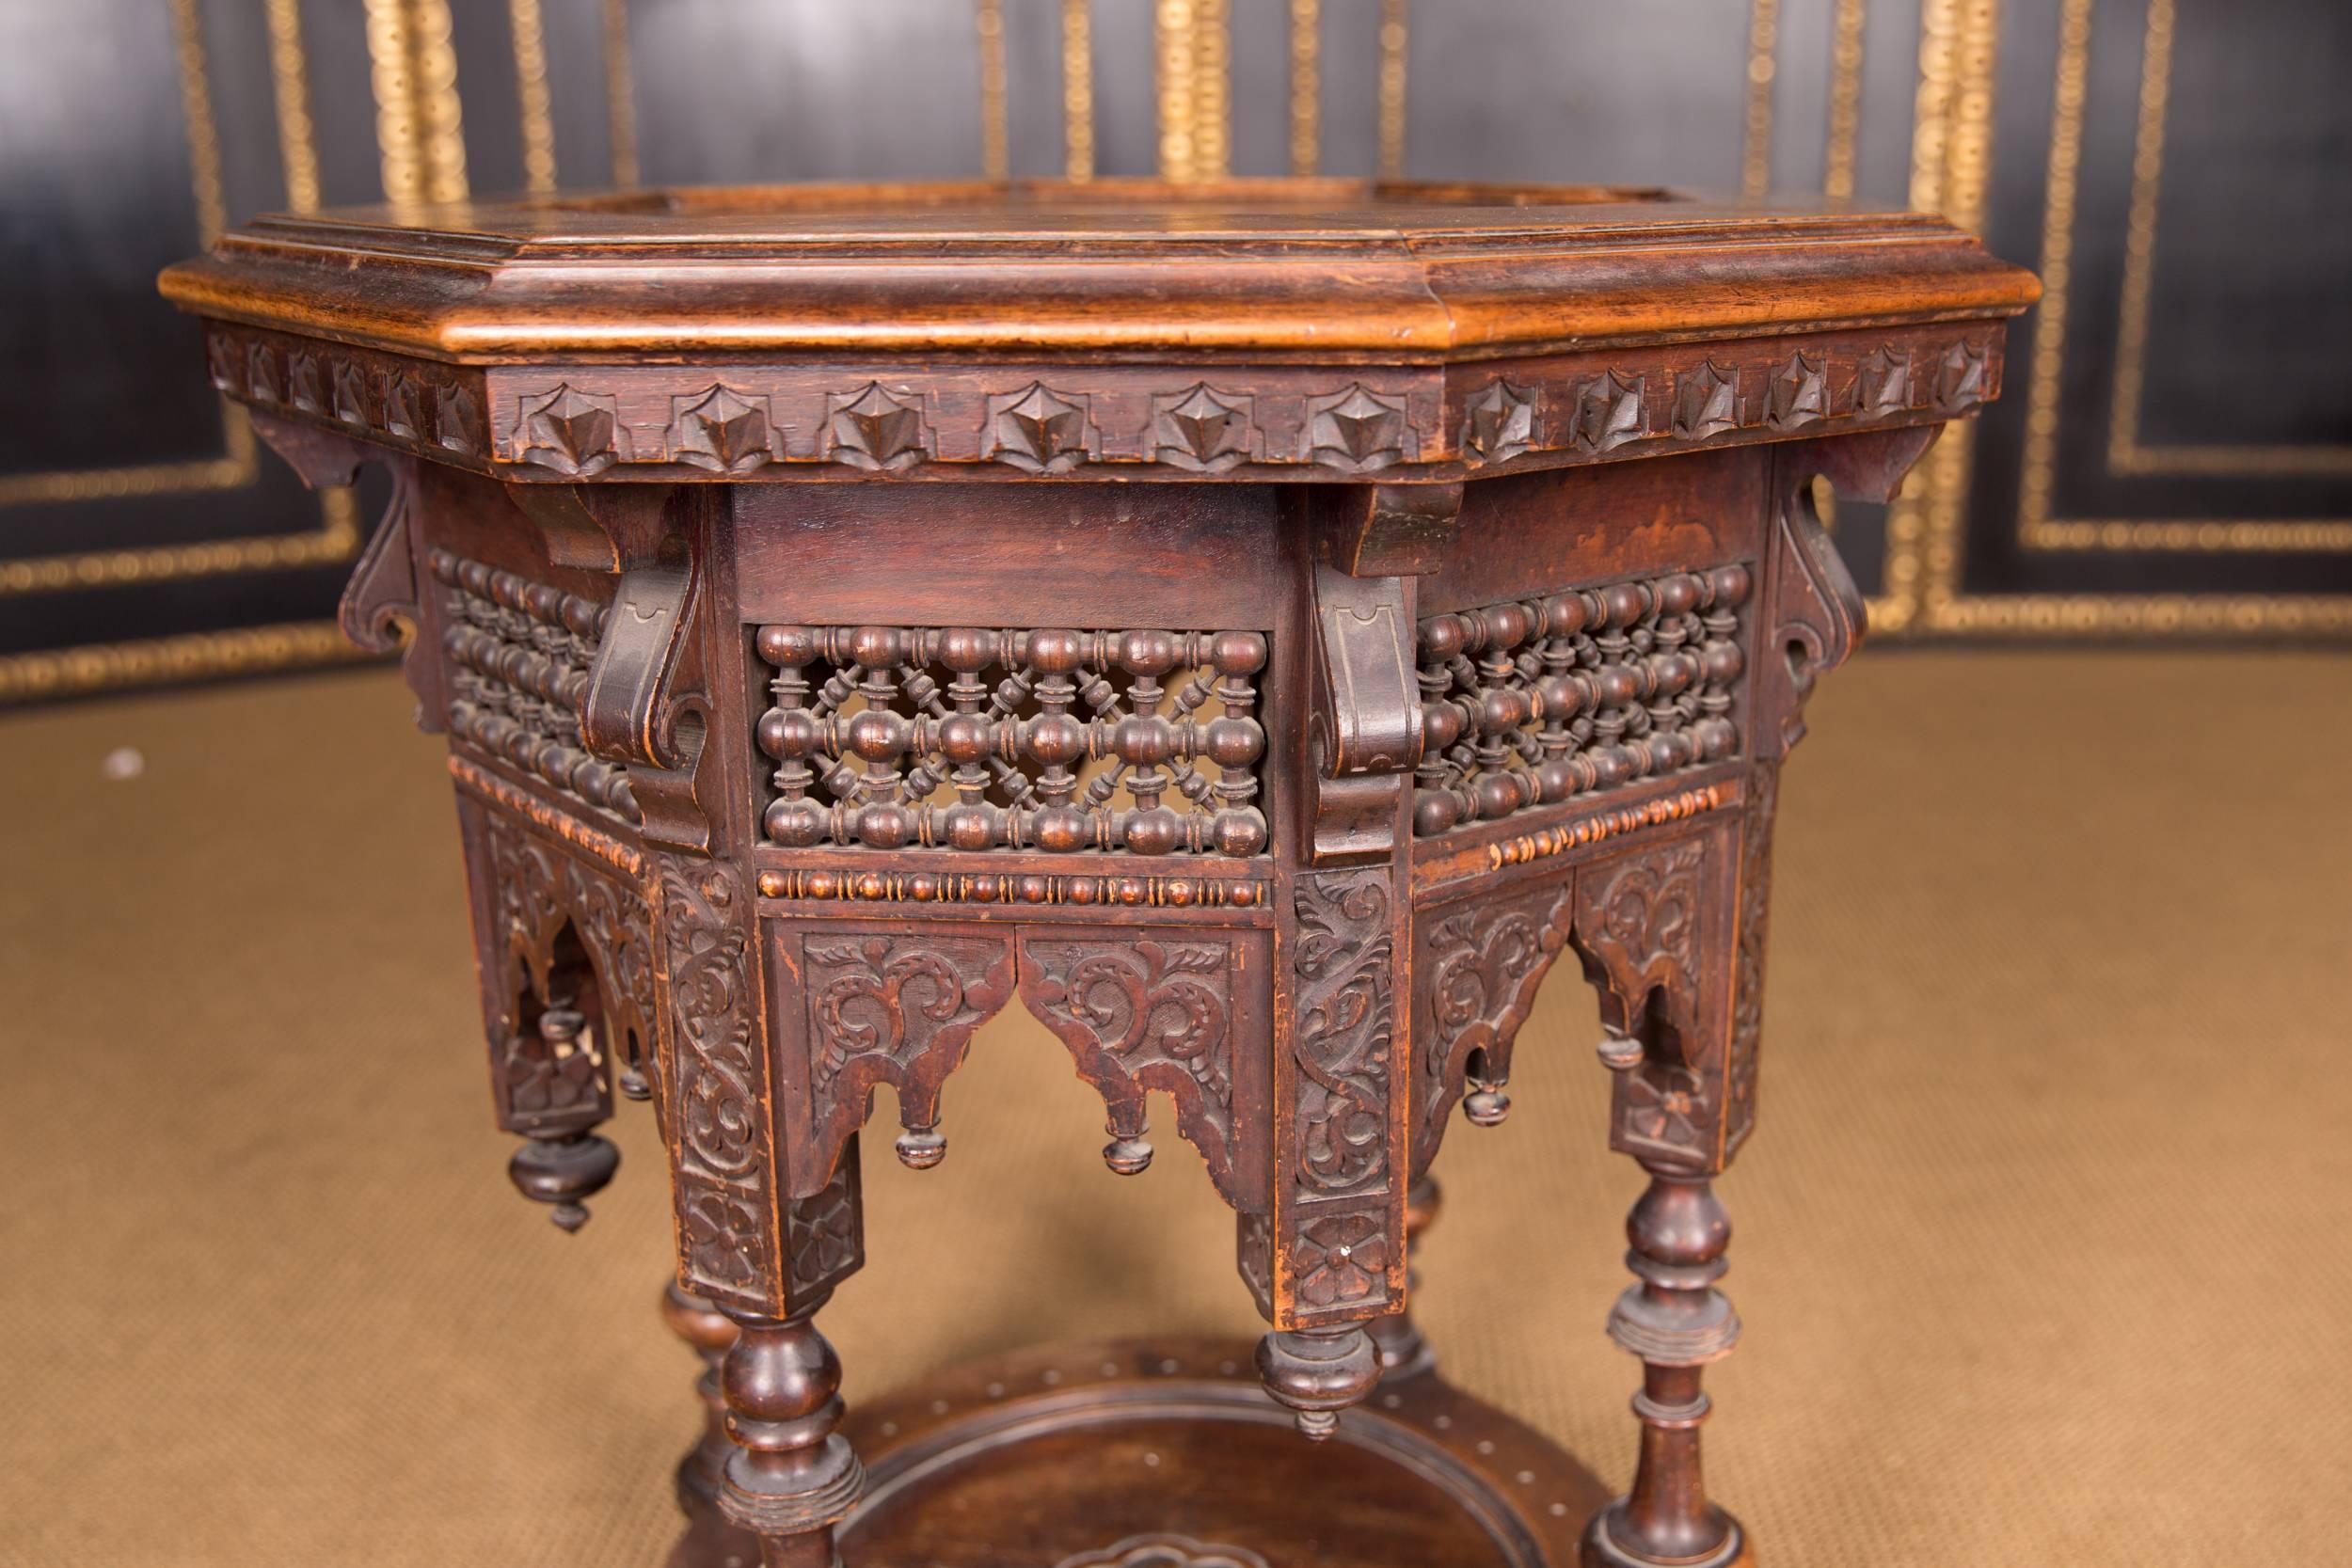 Hand-Carved 19th Century antique Oriental Octogonal Table with Inlaid circa 1900 beech